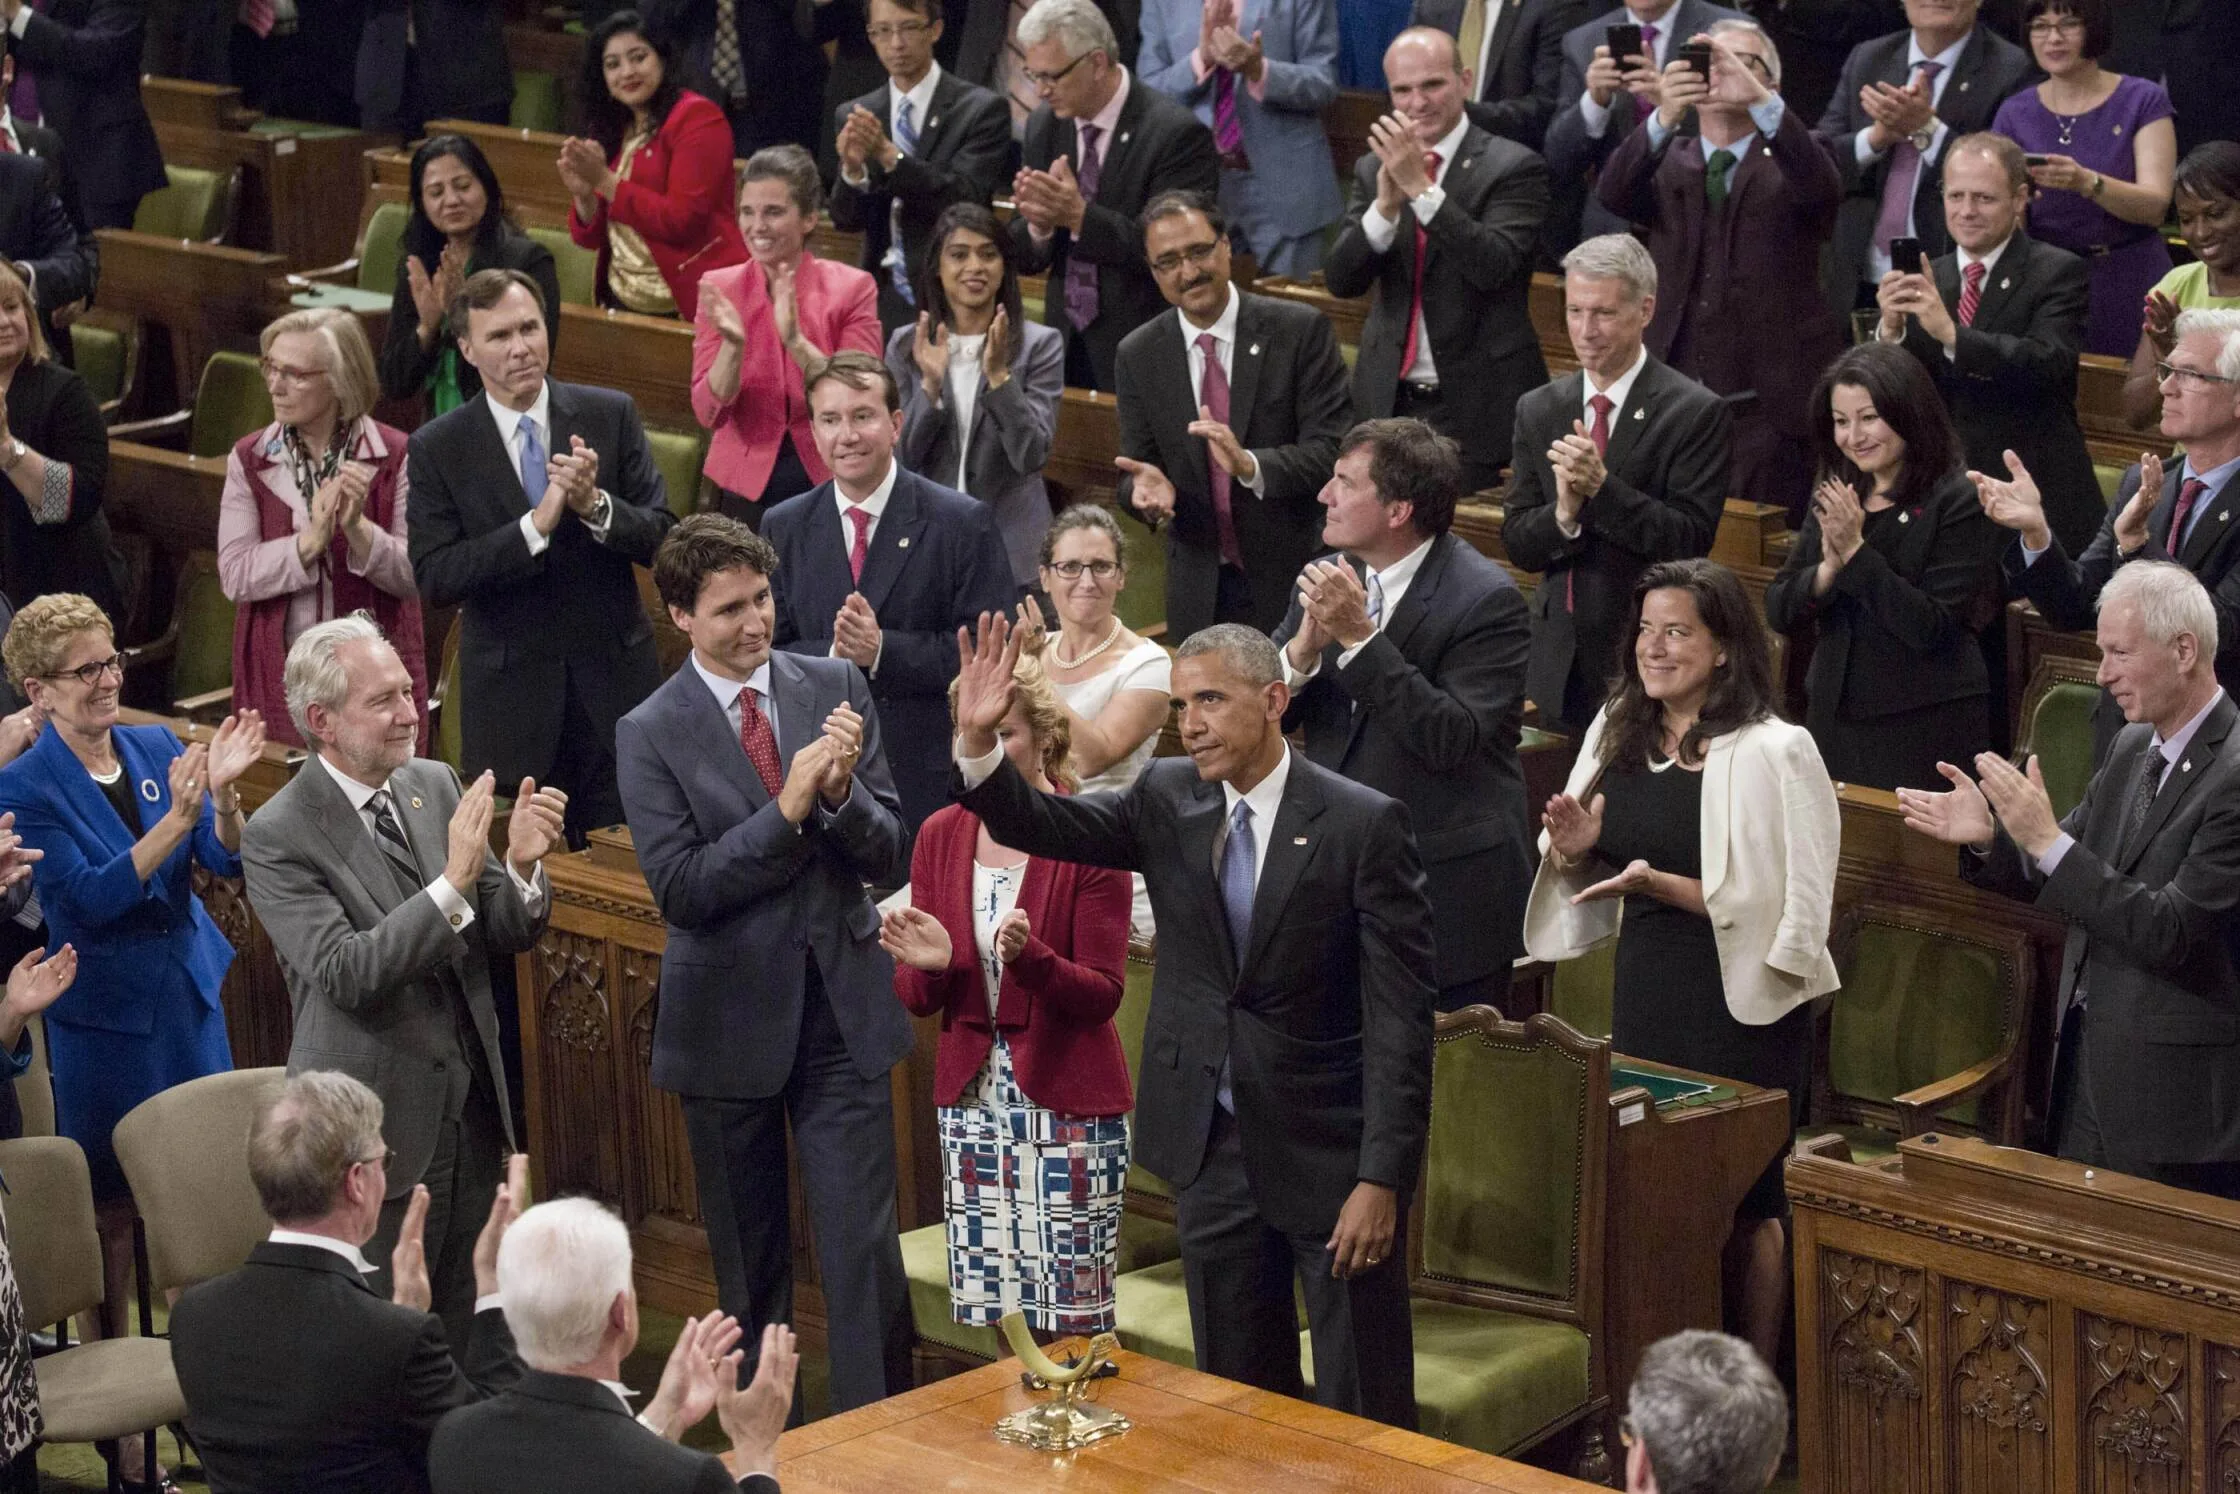 Obama's Speech to the Parliament of Canada 2016